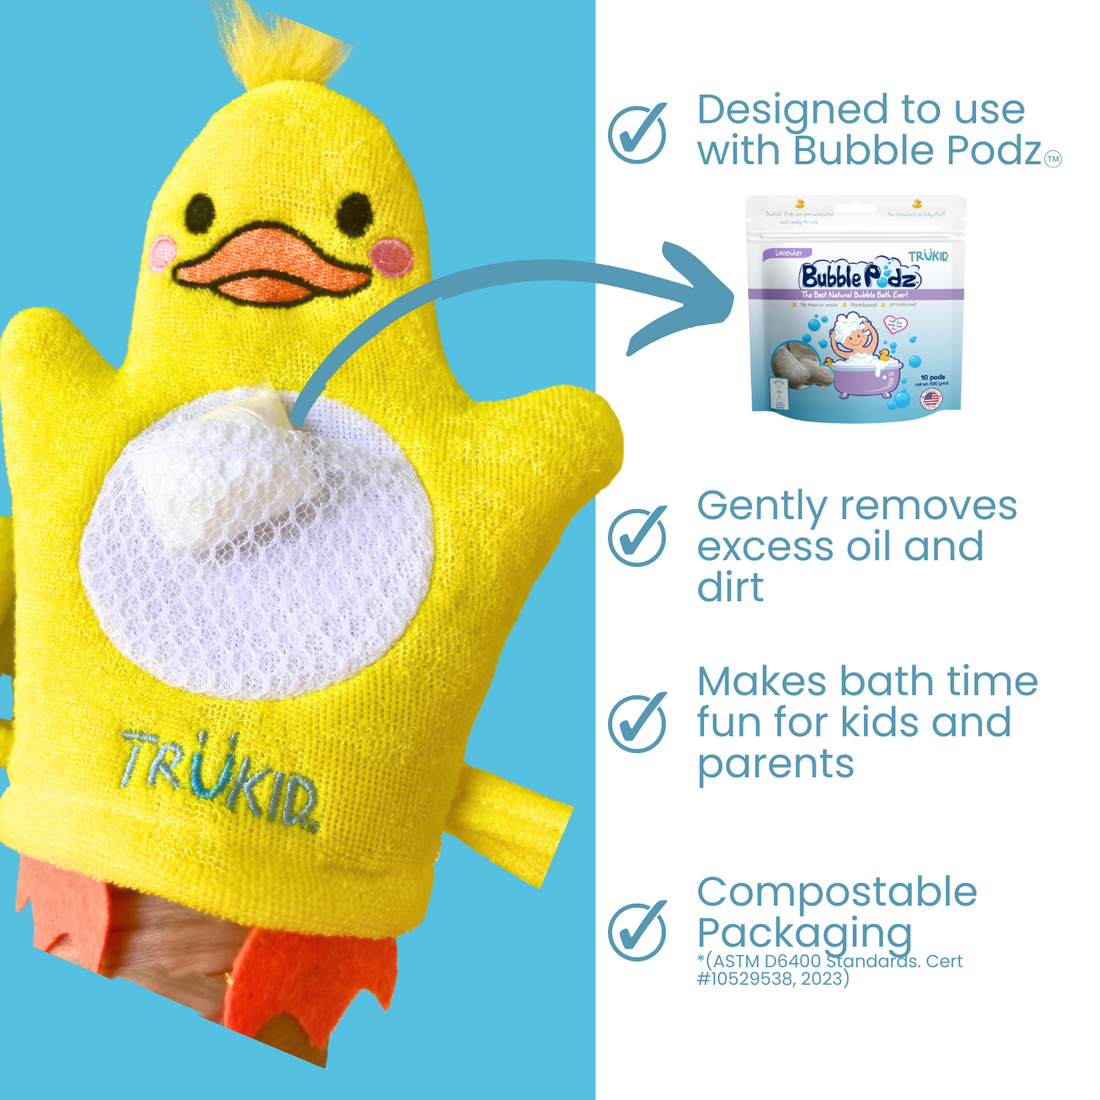 TruKid Bubble Glove Duck Family designed to use with Bubble Podz